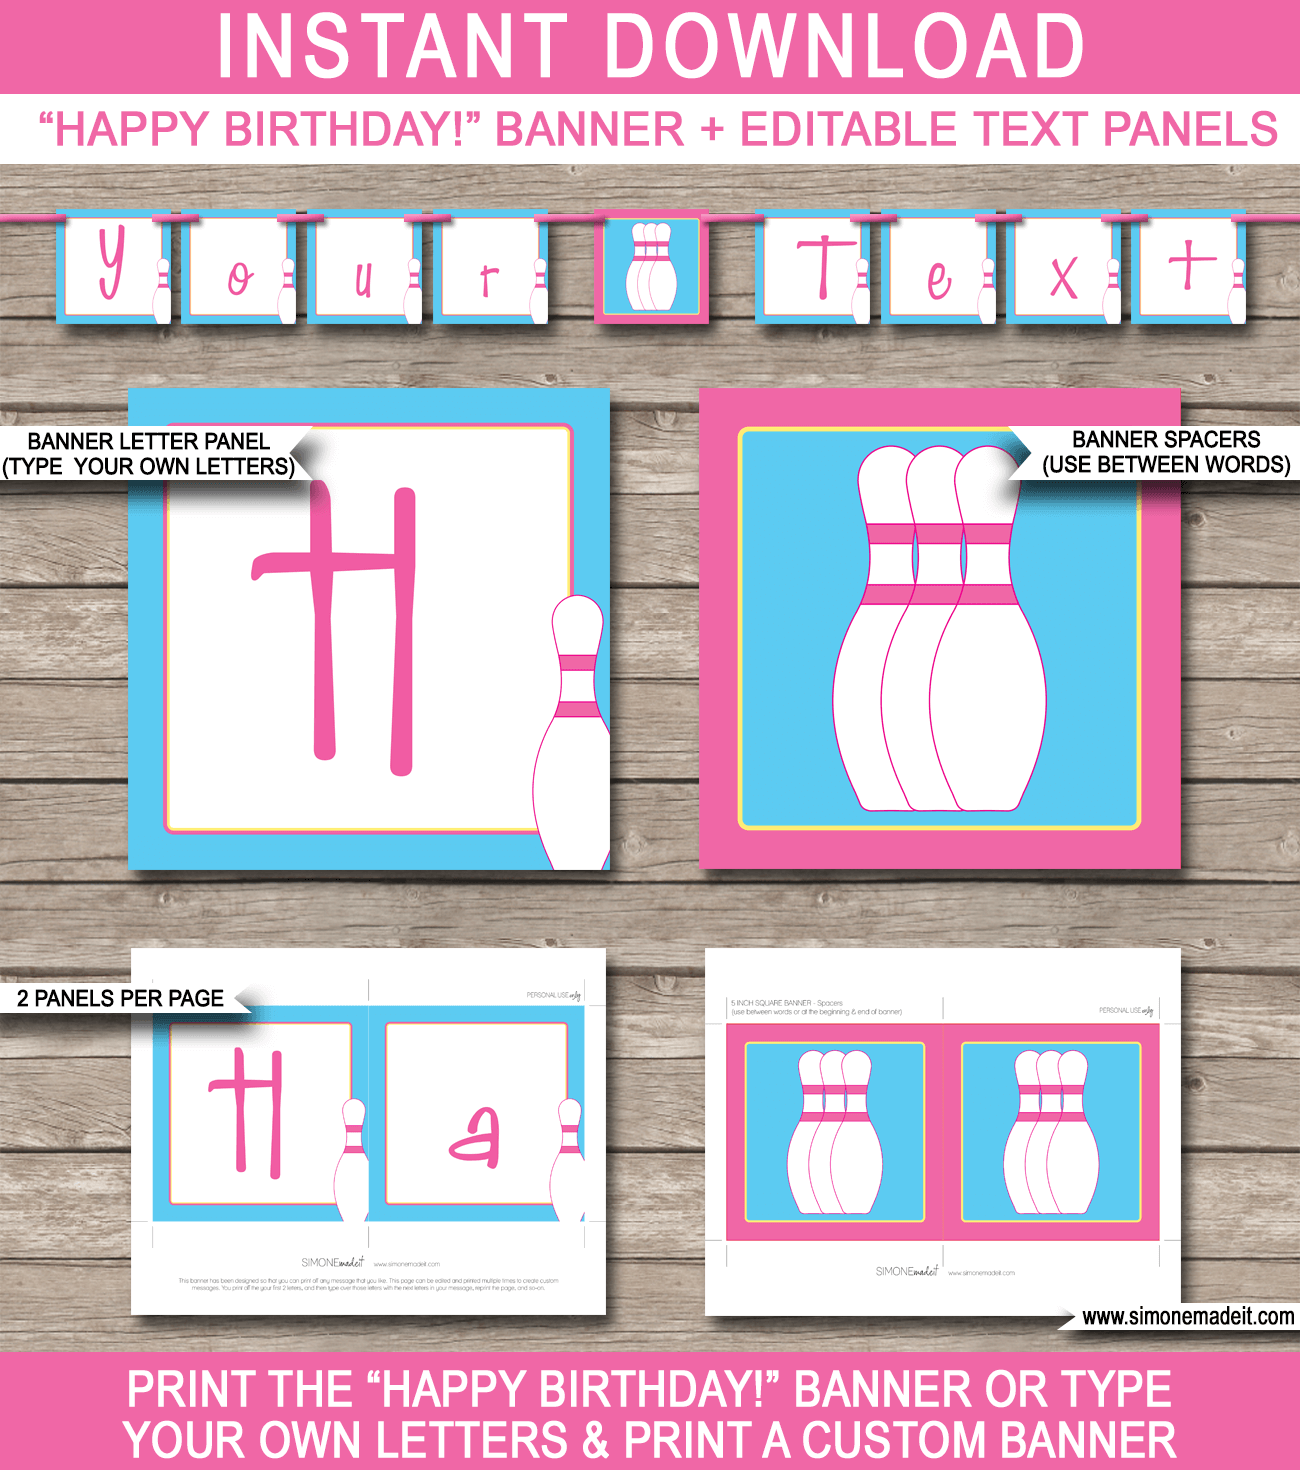 Pink Girls Bowling Party Banner Template - Girls Bowling Bunting - Happy Birthday Banner - Birthday Party - Editable and Printable DIY Template - INSTANT DOWNLOAD $4.50 via simonemadeit.com